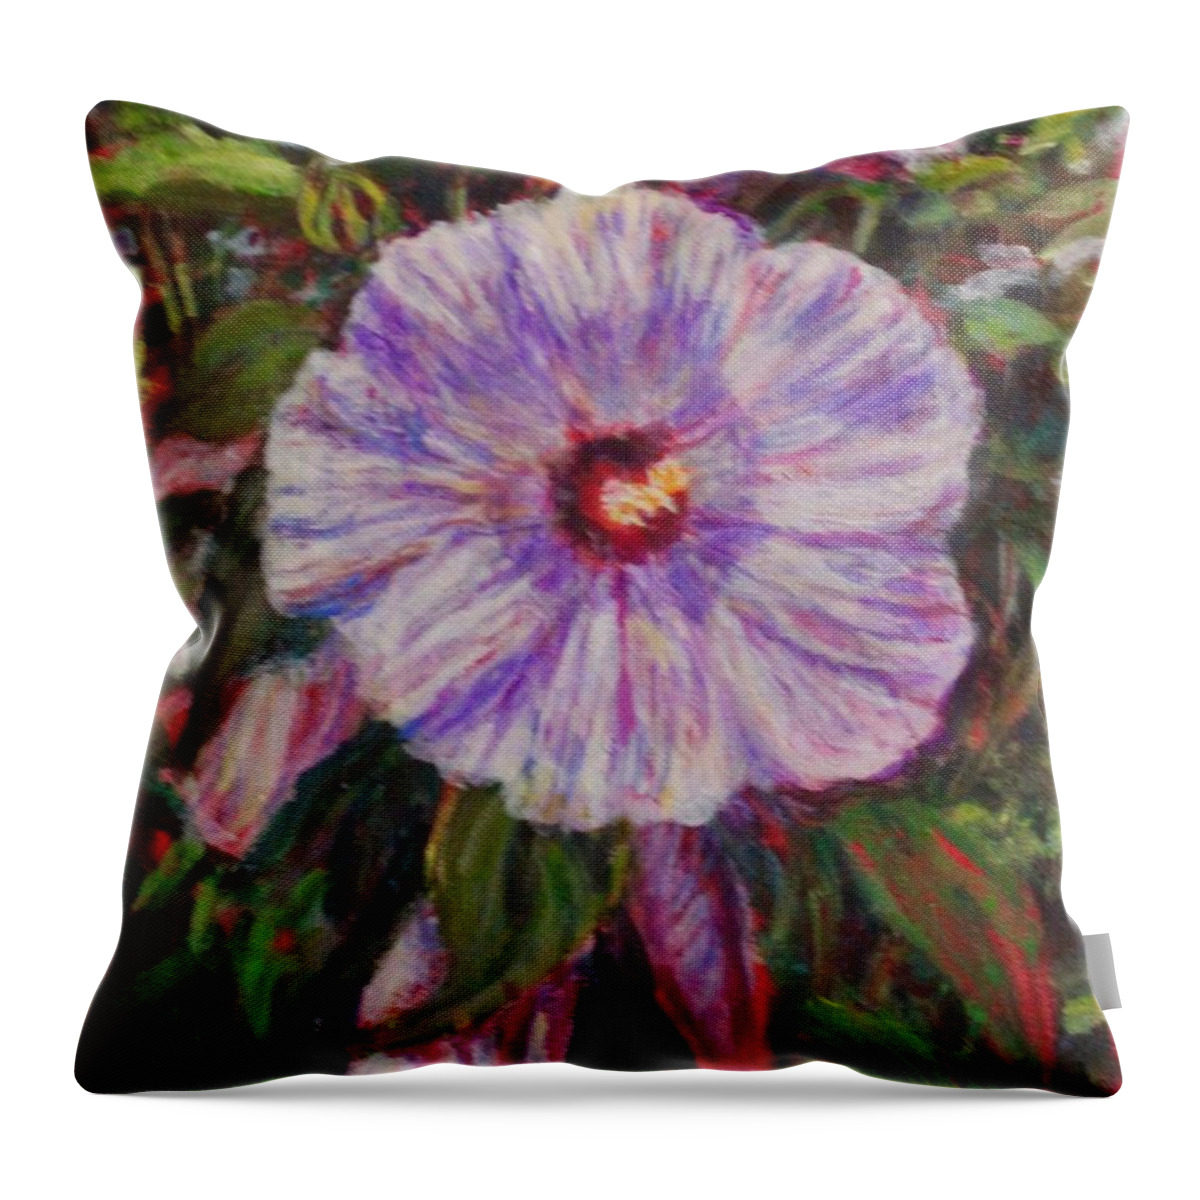 Flower Pink Flower Throw Pillow featuring the painting Hibiscus by Veronica Cassell vaz